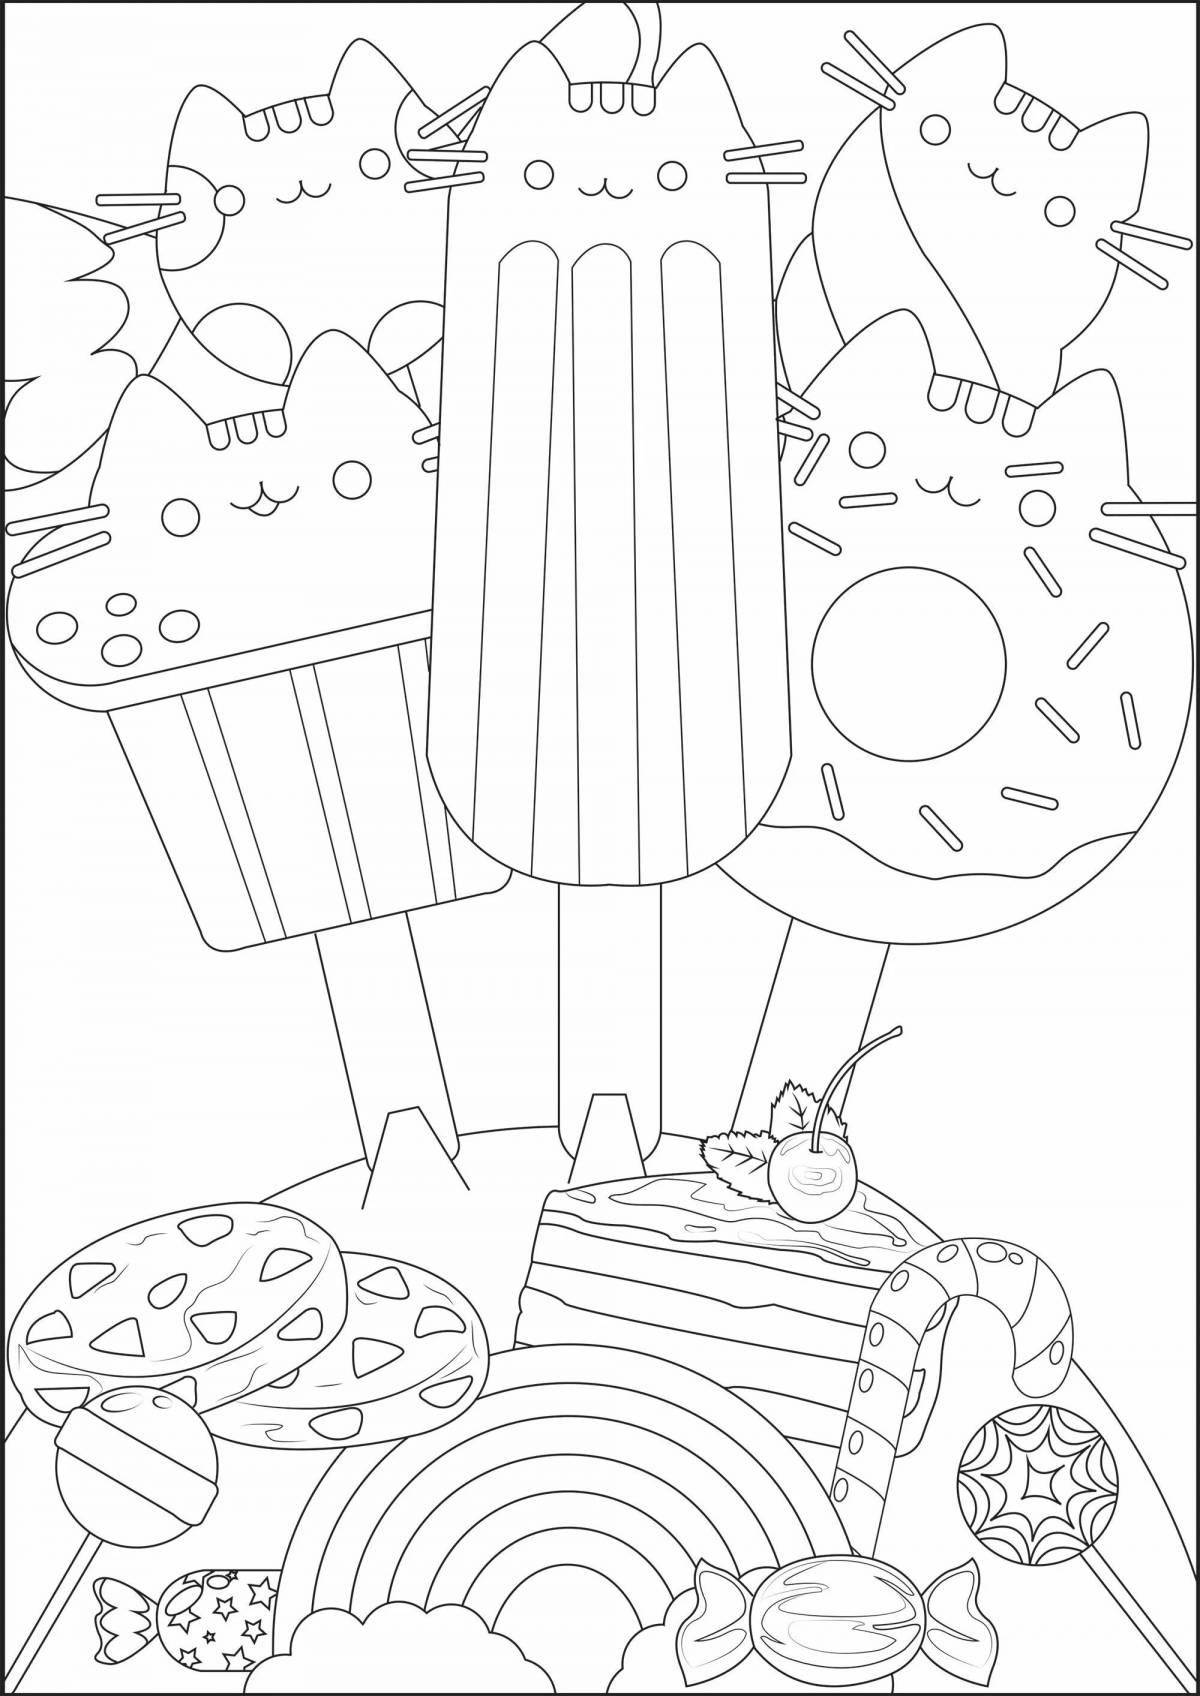 Coloring page delicious donuts and ice cream